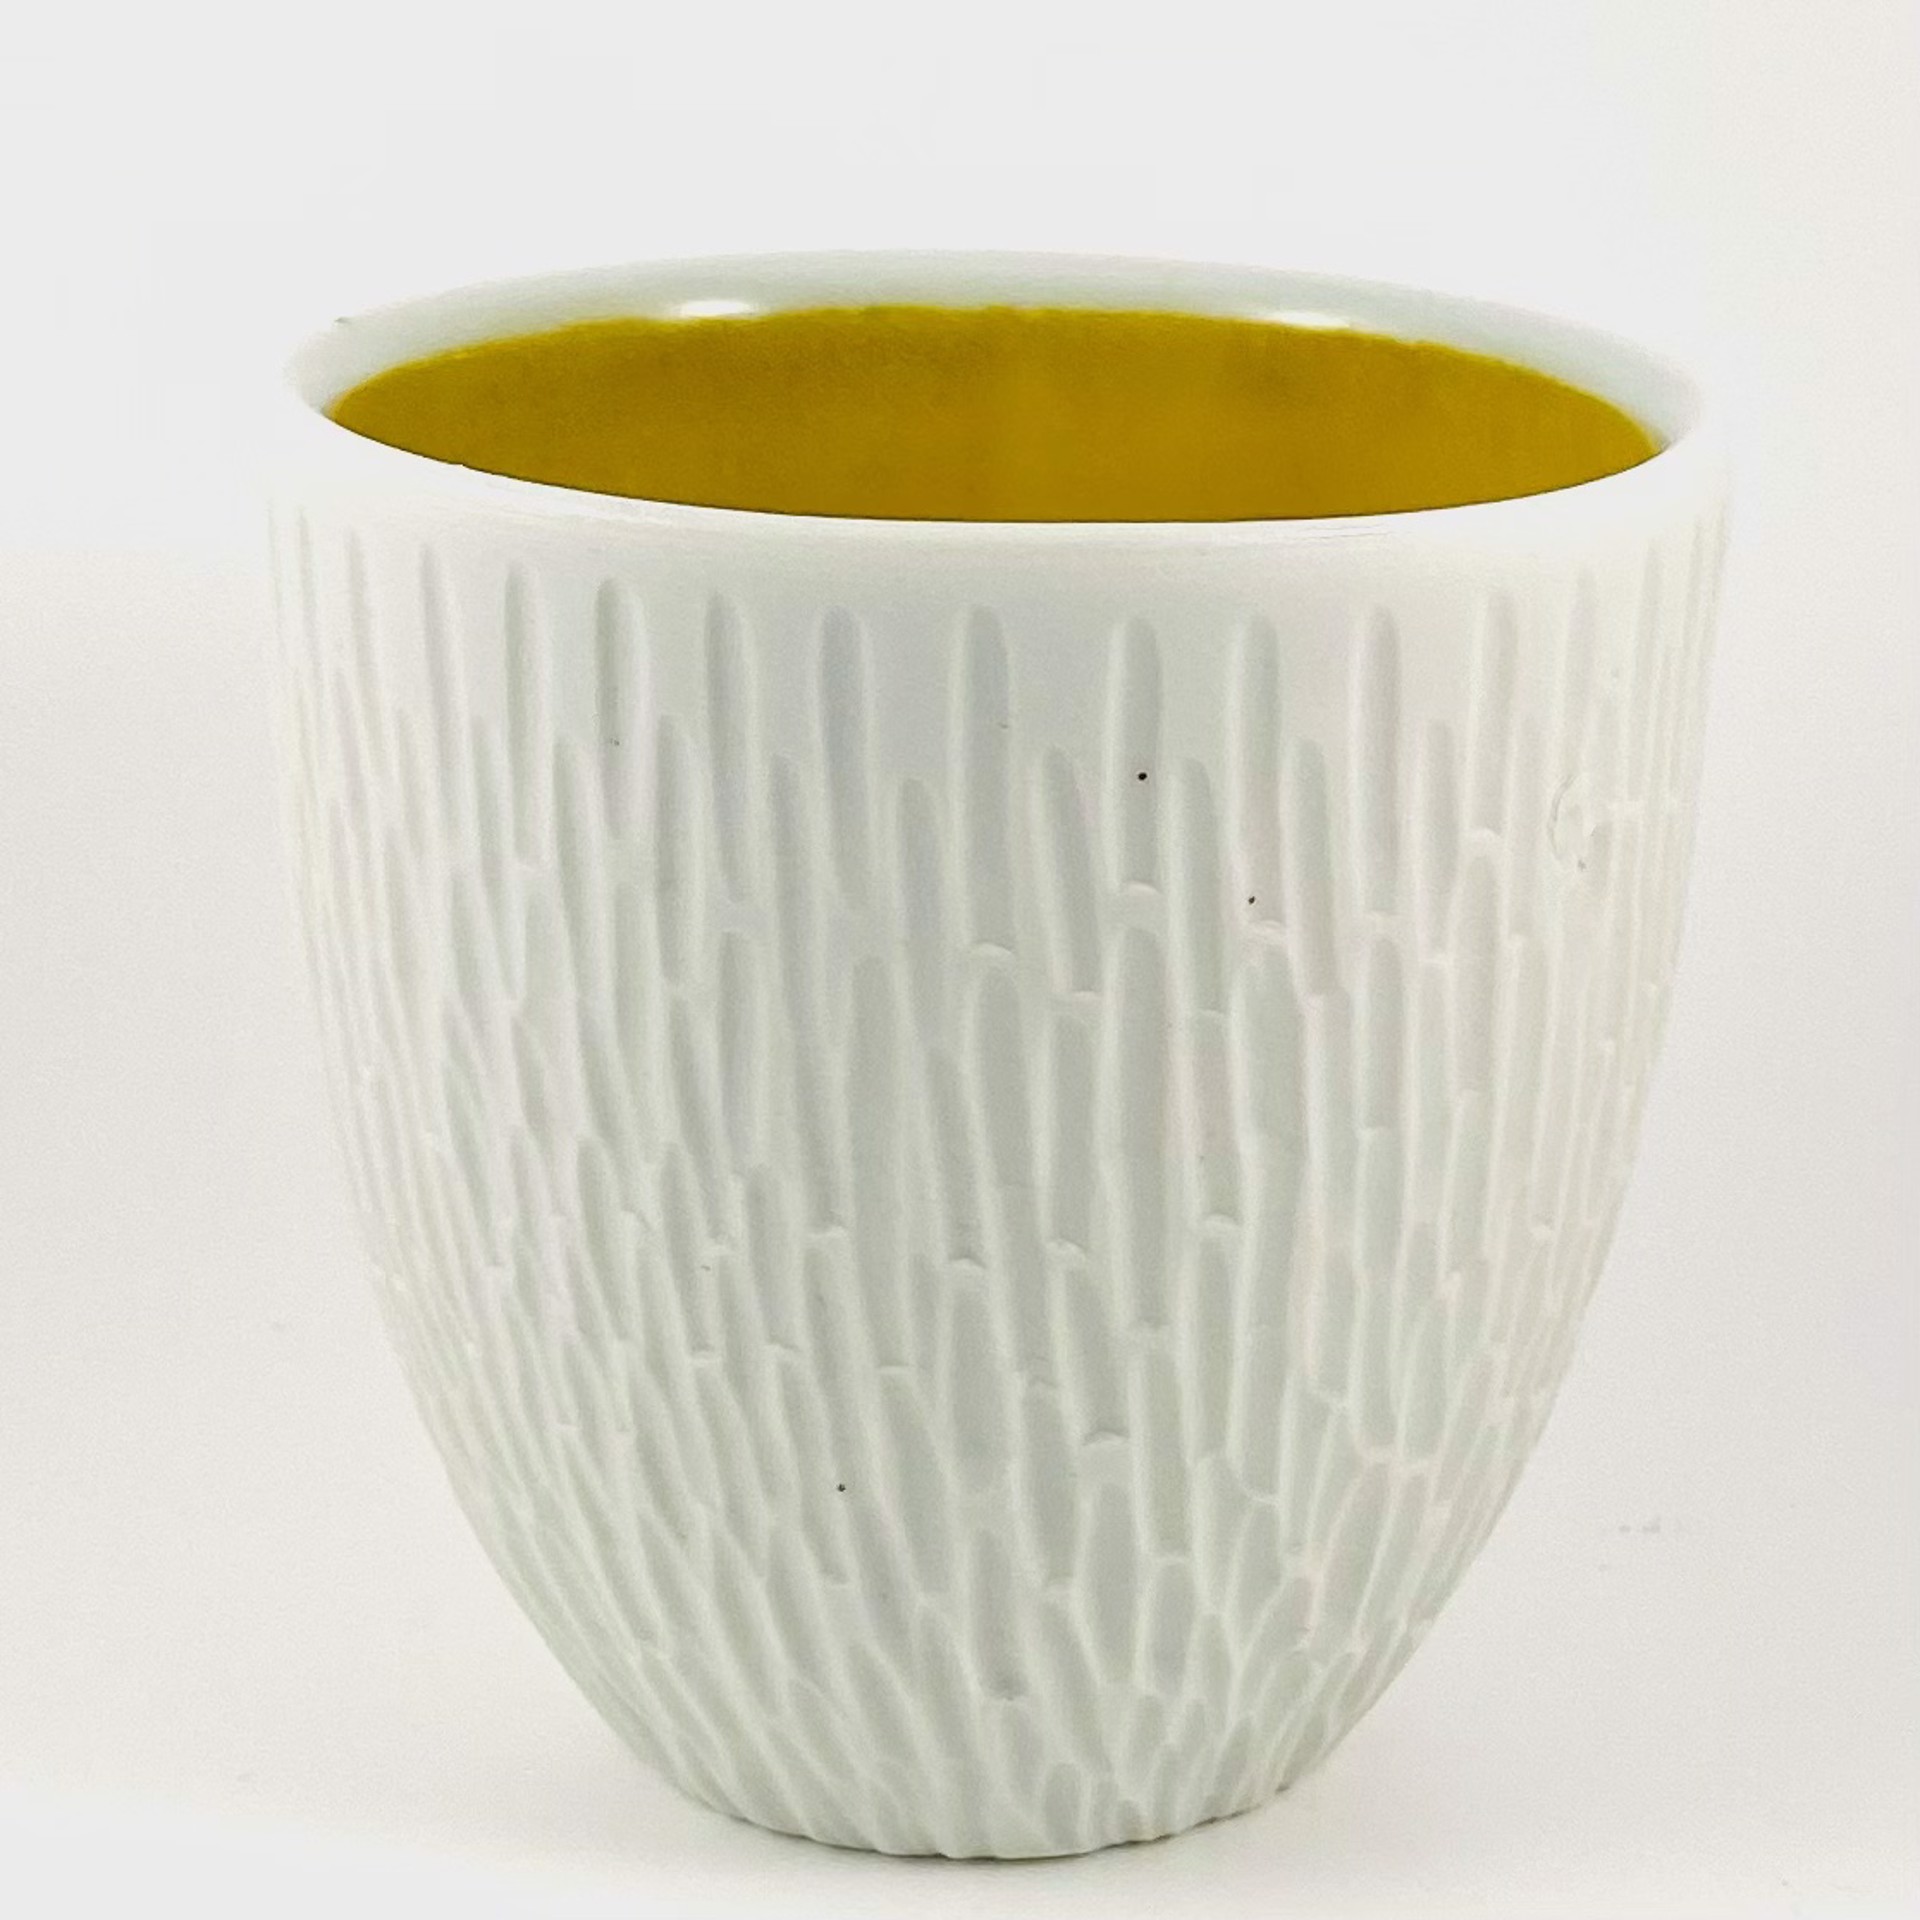 Textured Cup with Yellow Glazed Interior AJ21-4 by Ann John